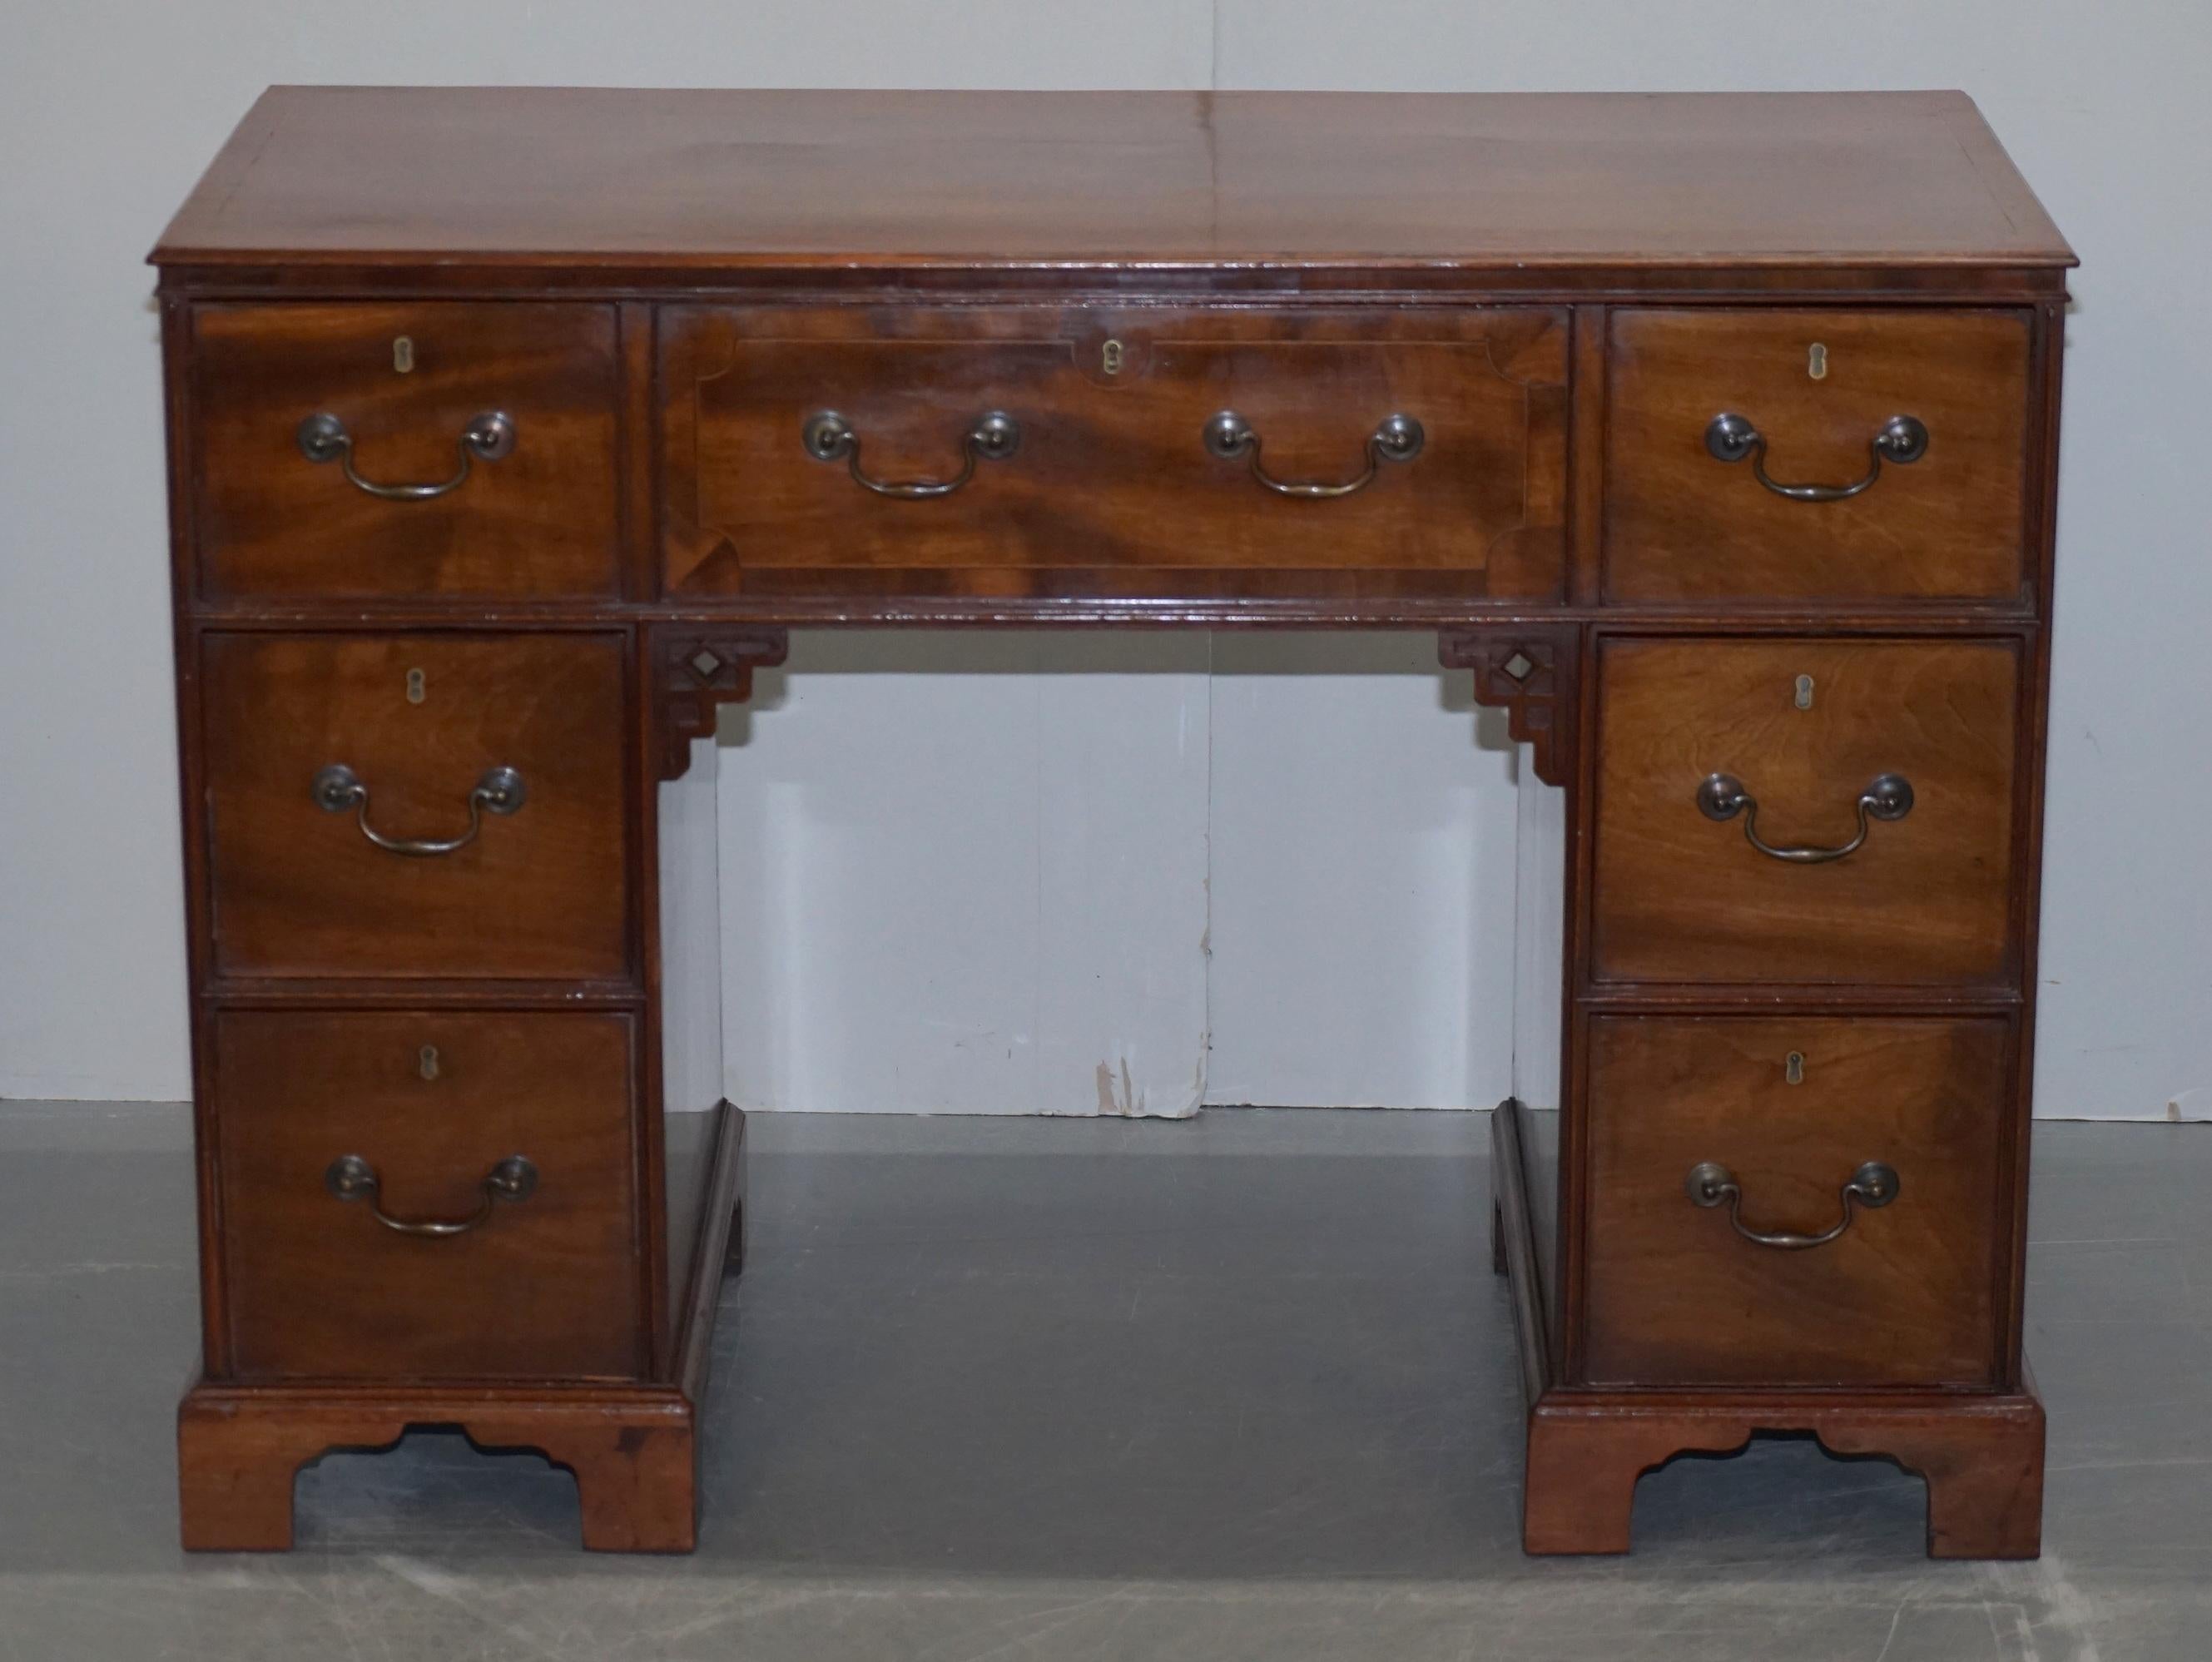 We are delighted to offer for sale this stunning circa 1800-1820 original Georgian / Regency Military campaign desk with large top map drawer

A very well made piece in fine mahogany with all the original fixtures and fittings including the side